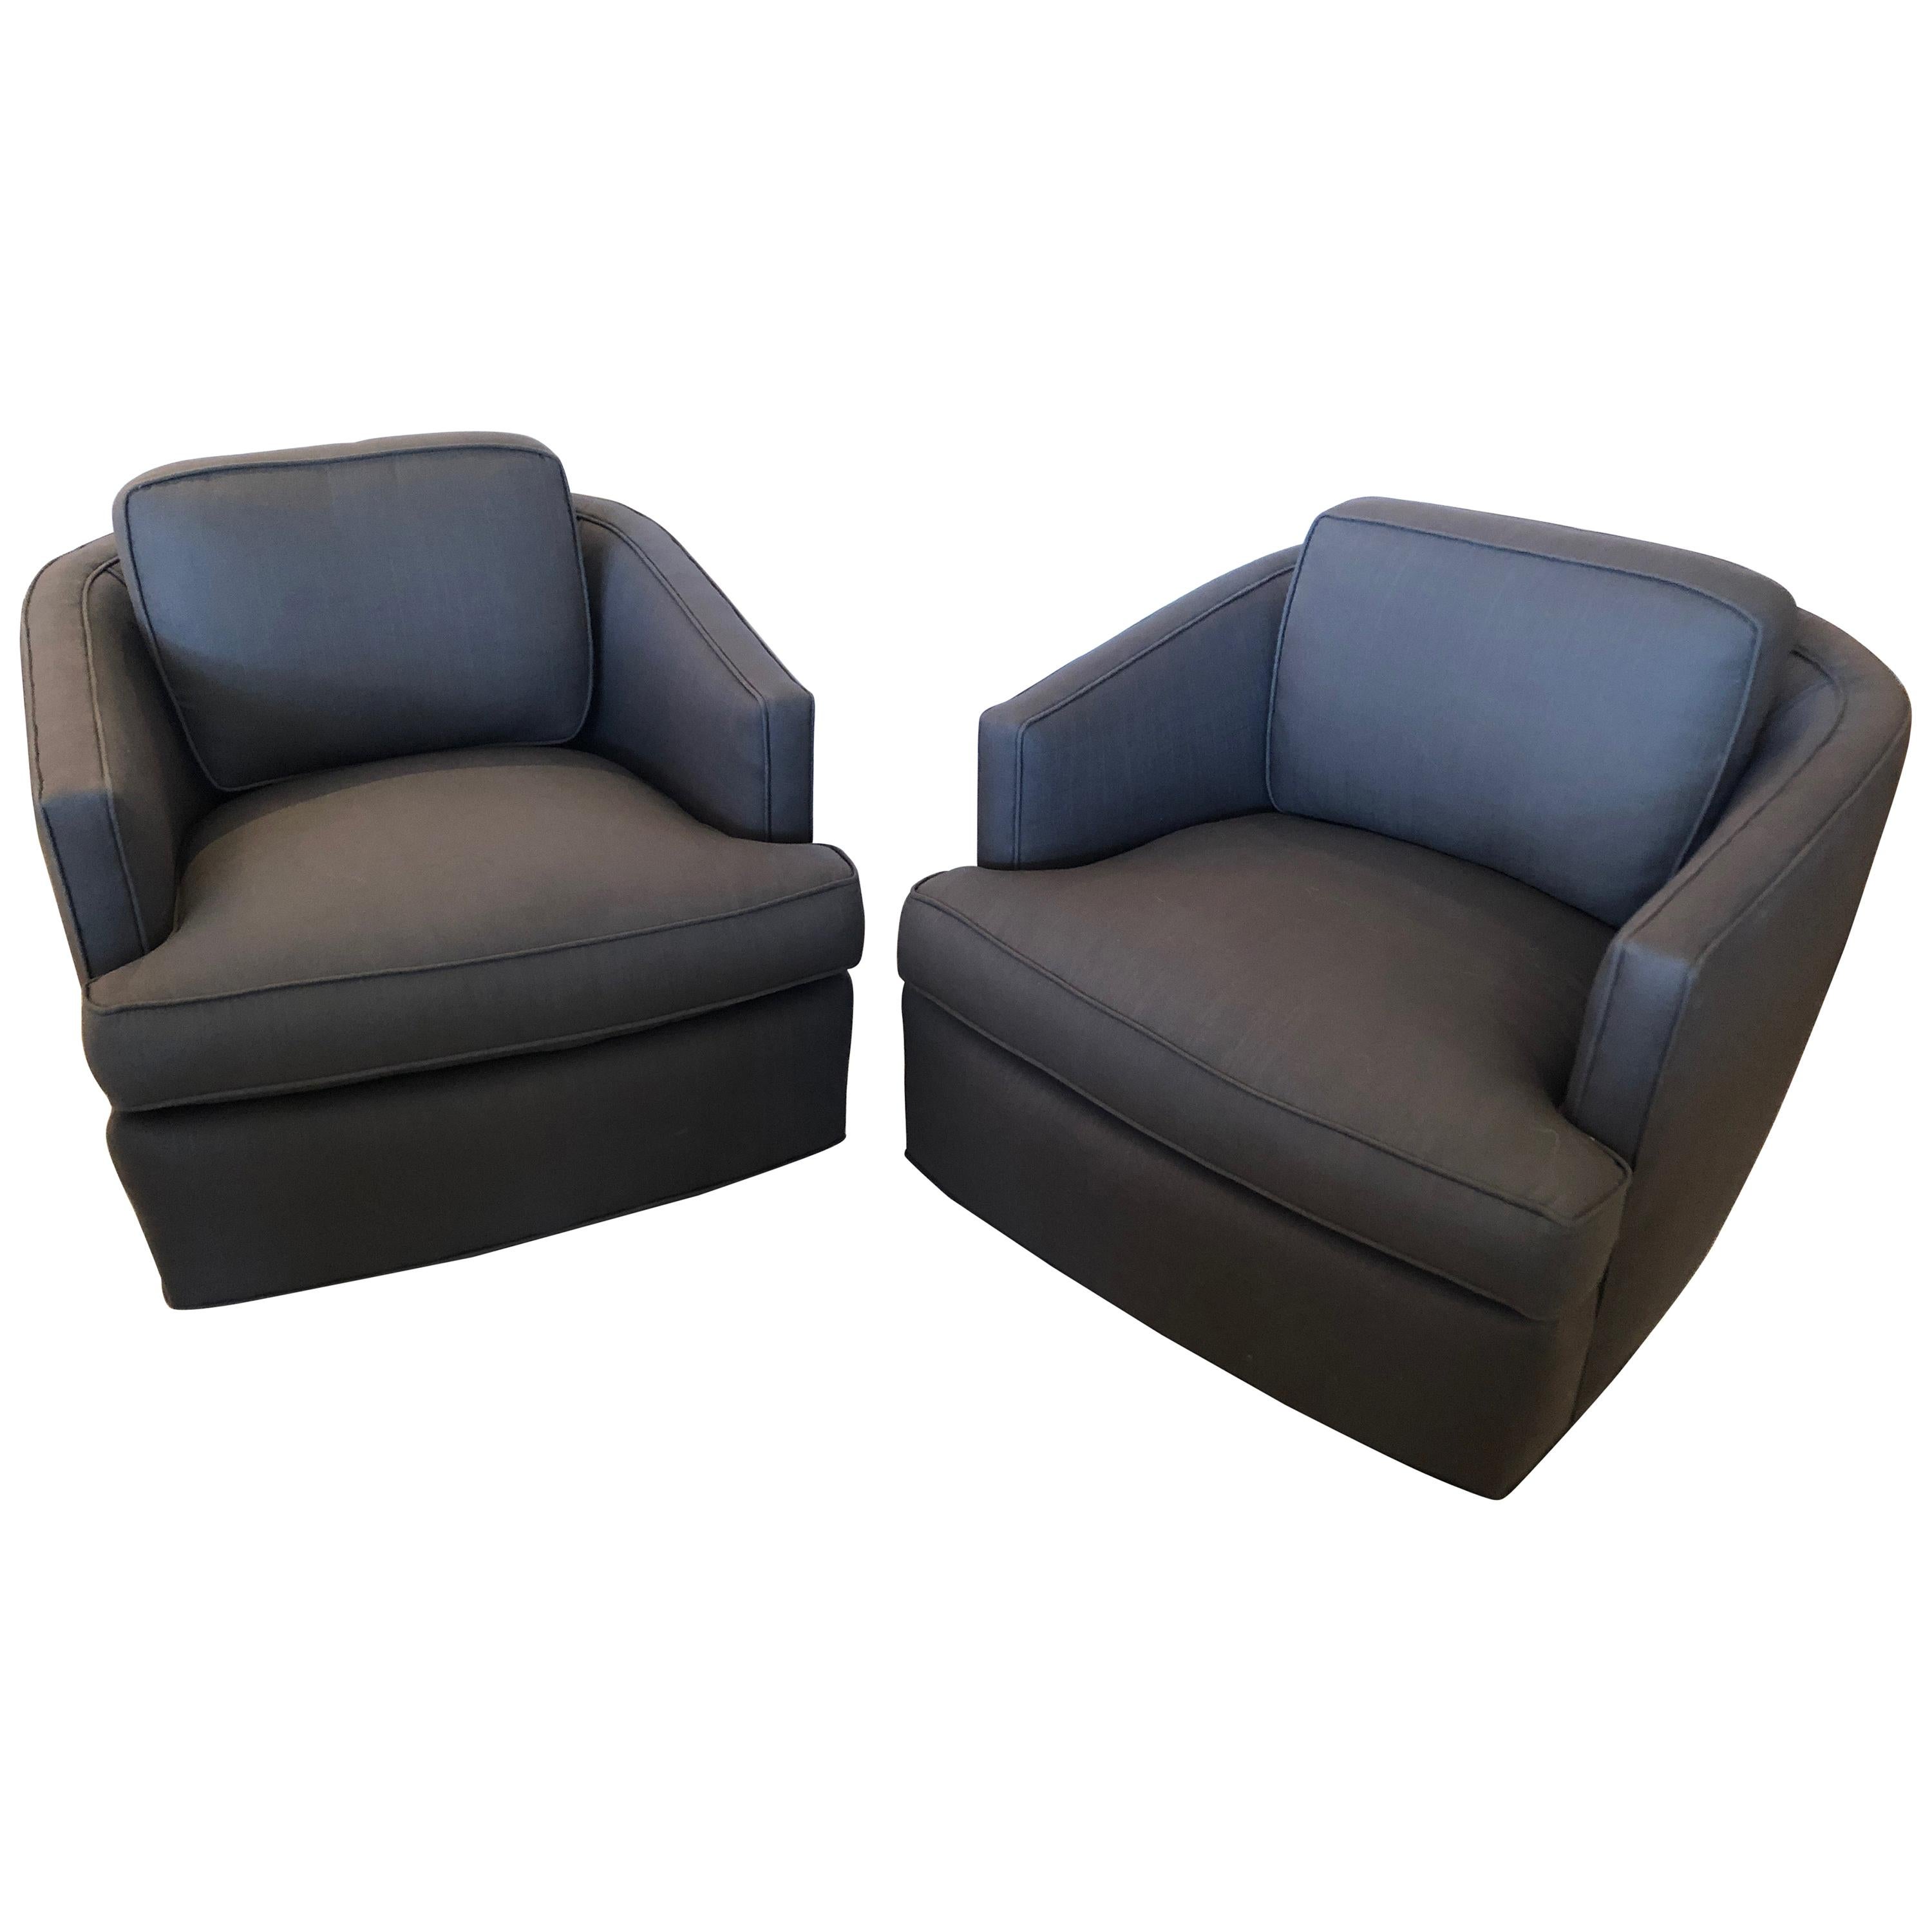 Pair of Newly Upholstered Mid-Century Modern Milo Baughman Style Swivel Chairs